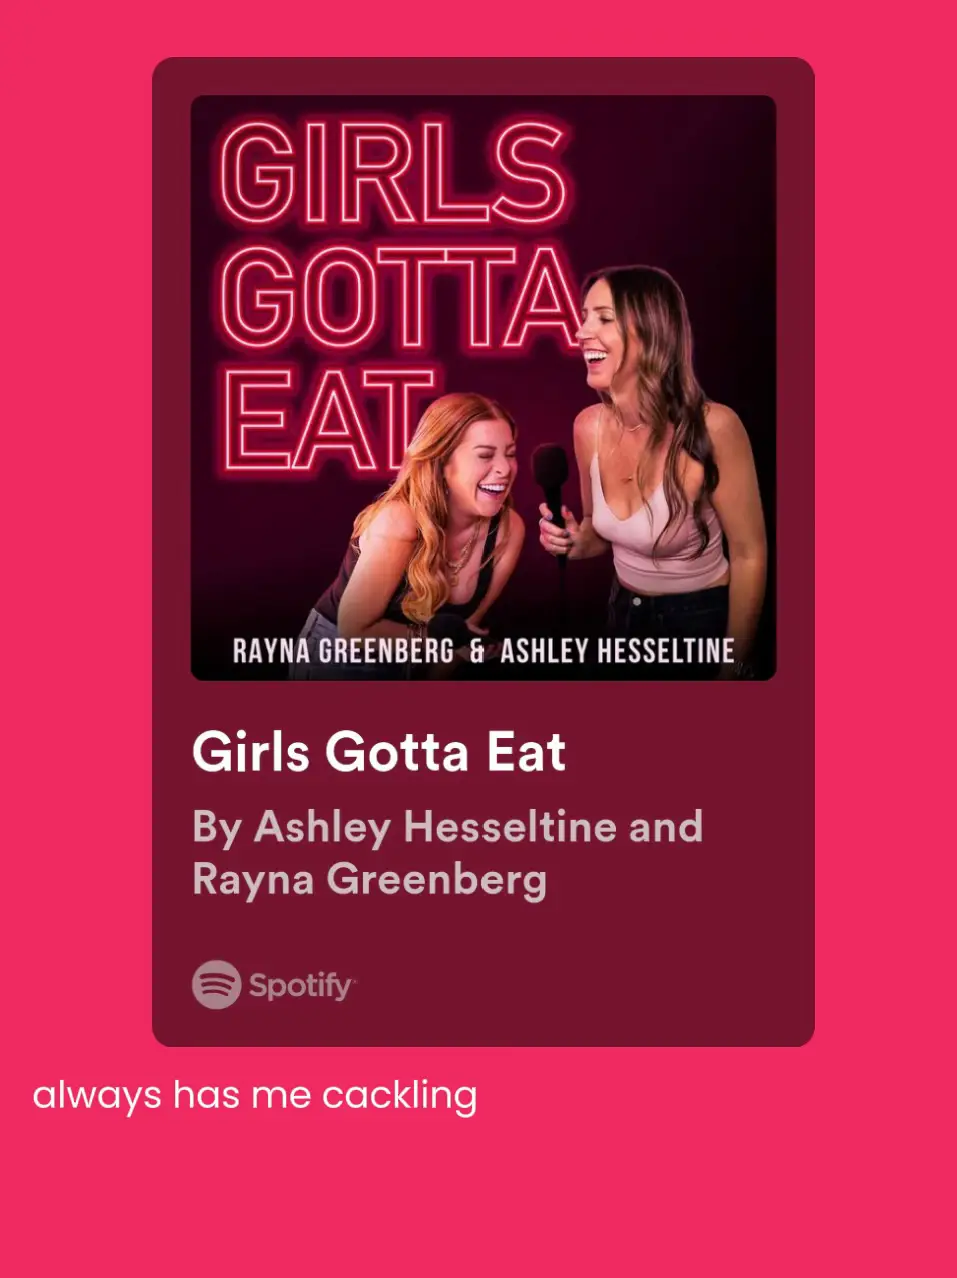  A Spotify ad for Girls Gotta Eat by Rayna Greenberg and Ashley Hesseltine.